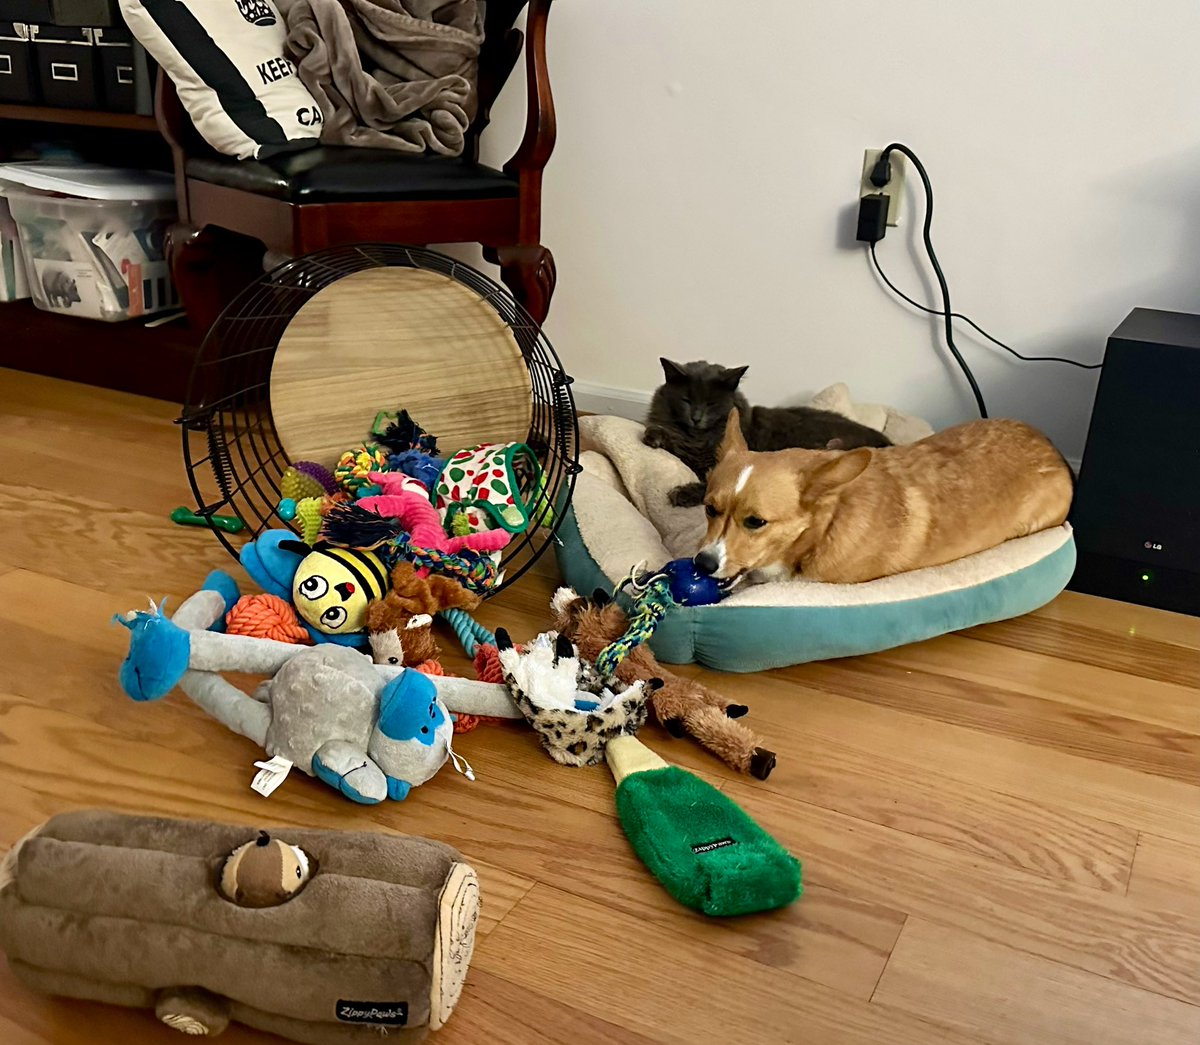 CatBrother has stolen Midge’s bed since it got chilly. But Midge isn’t even mad, she just keeps cleaning him and trying to give him toys to share. #CorgiCrew #corgi #dogsandcatslivingtogether #dogsoftwitter #dogsontwitter